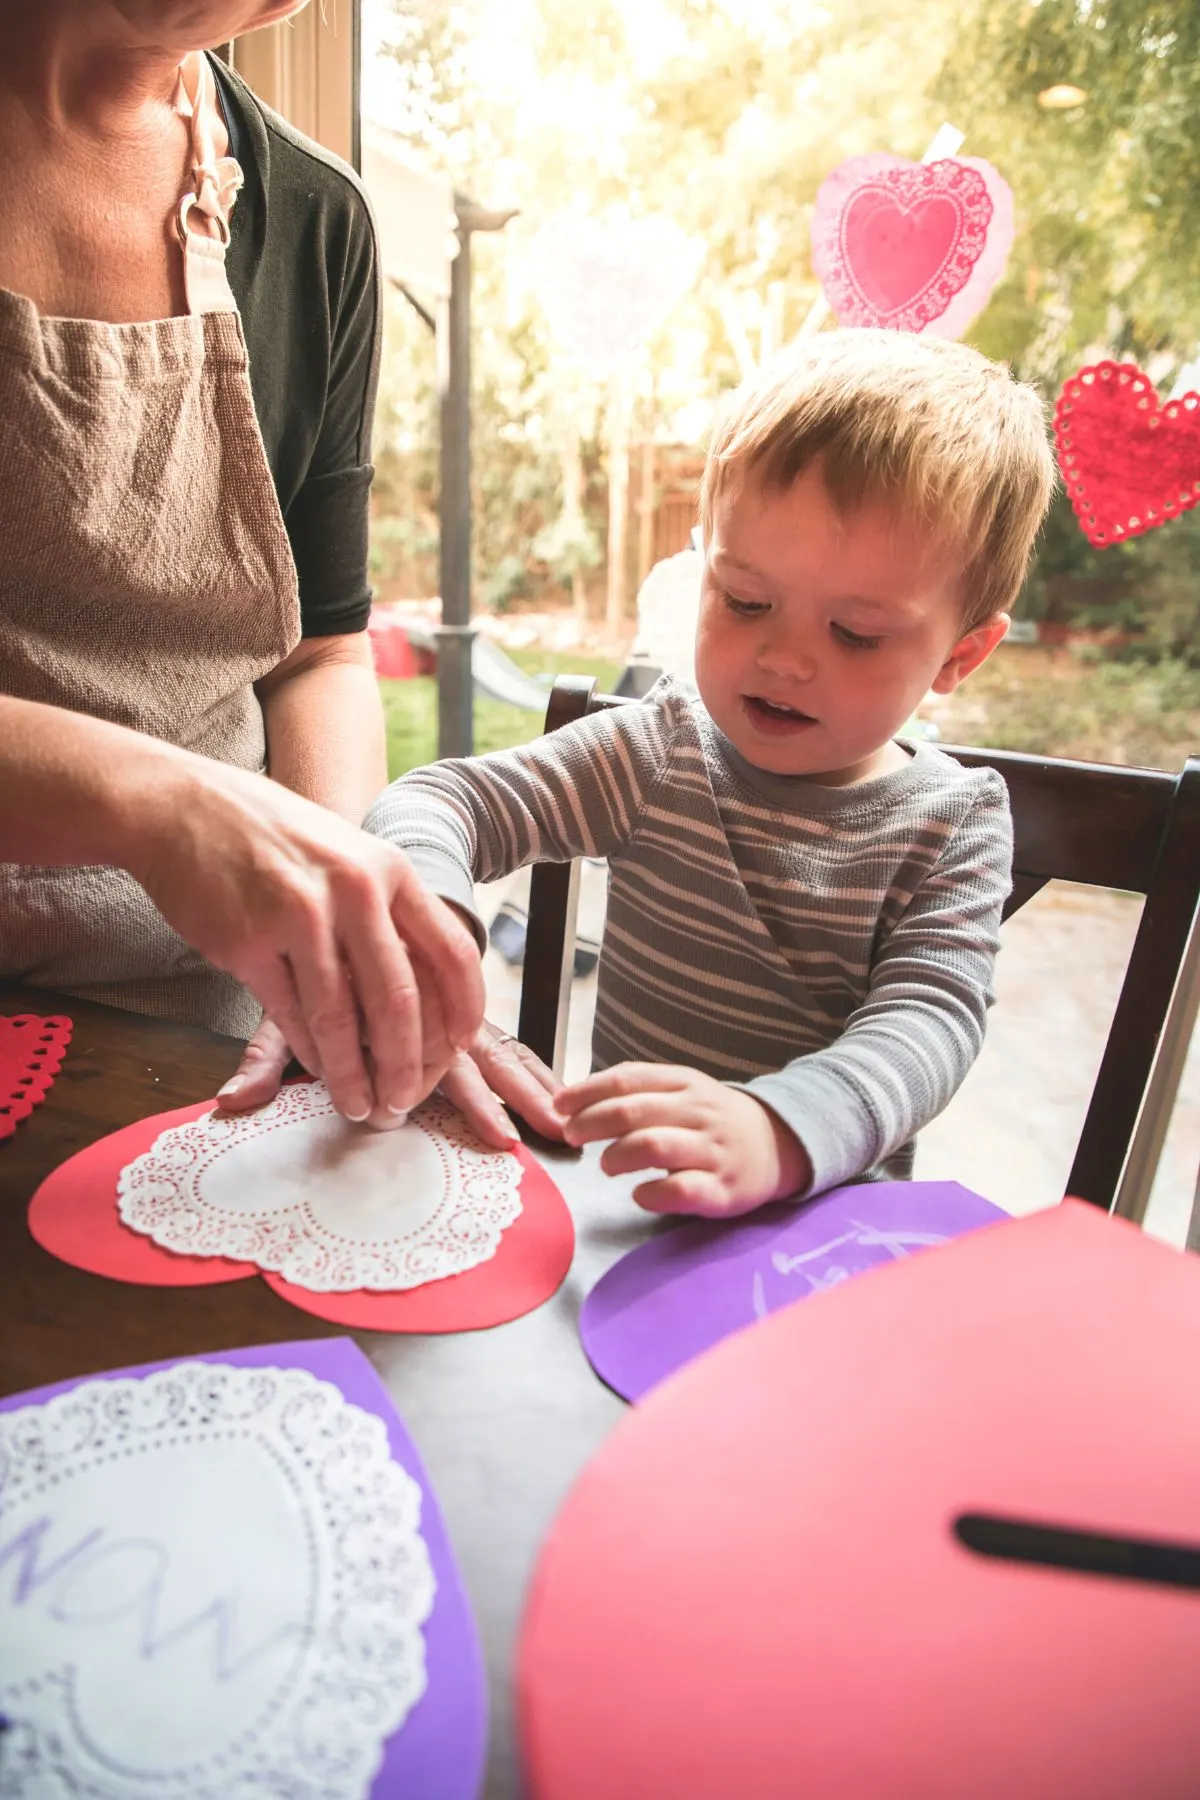 Toddler working on heart-shaped crafts for Valentine's Day with mom.